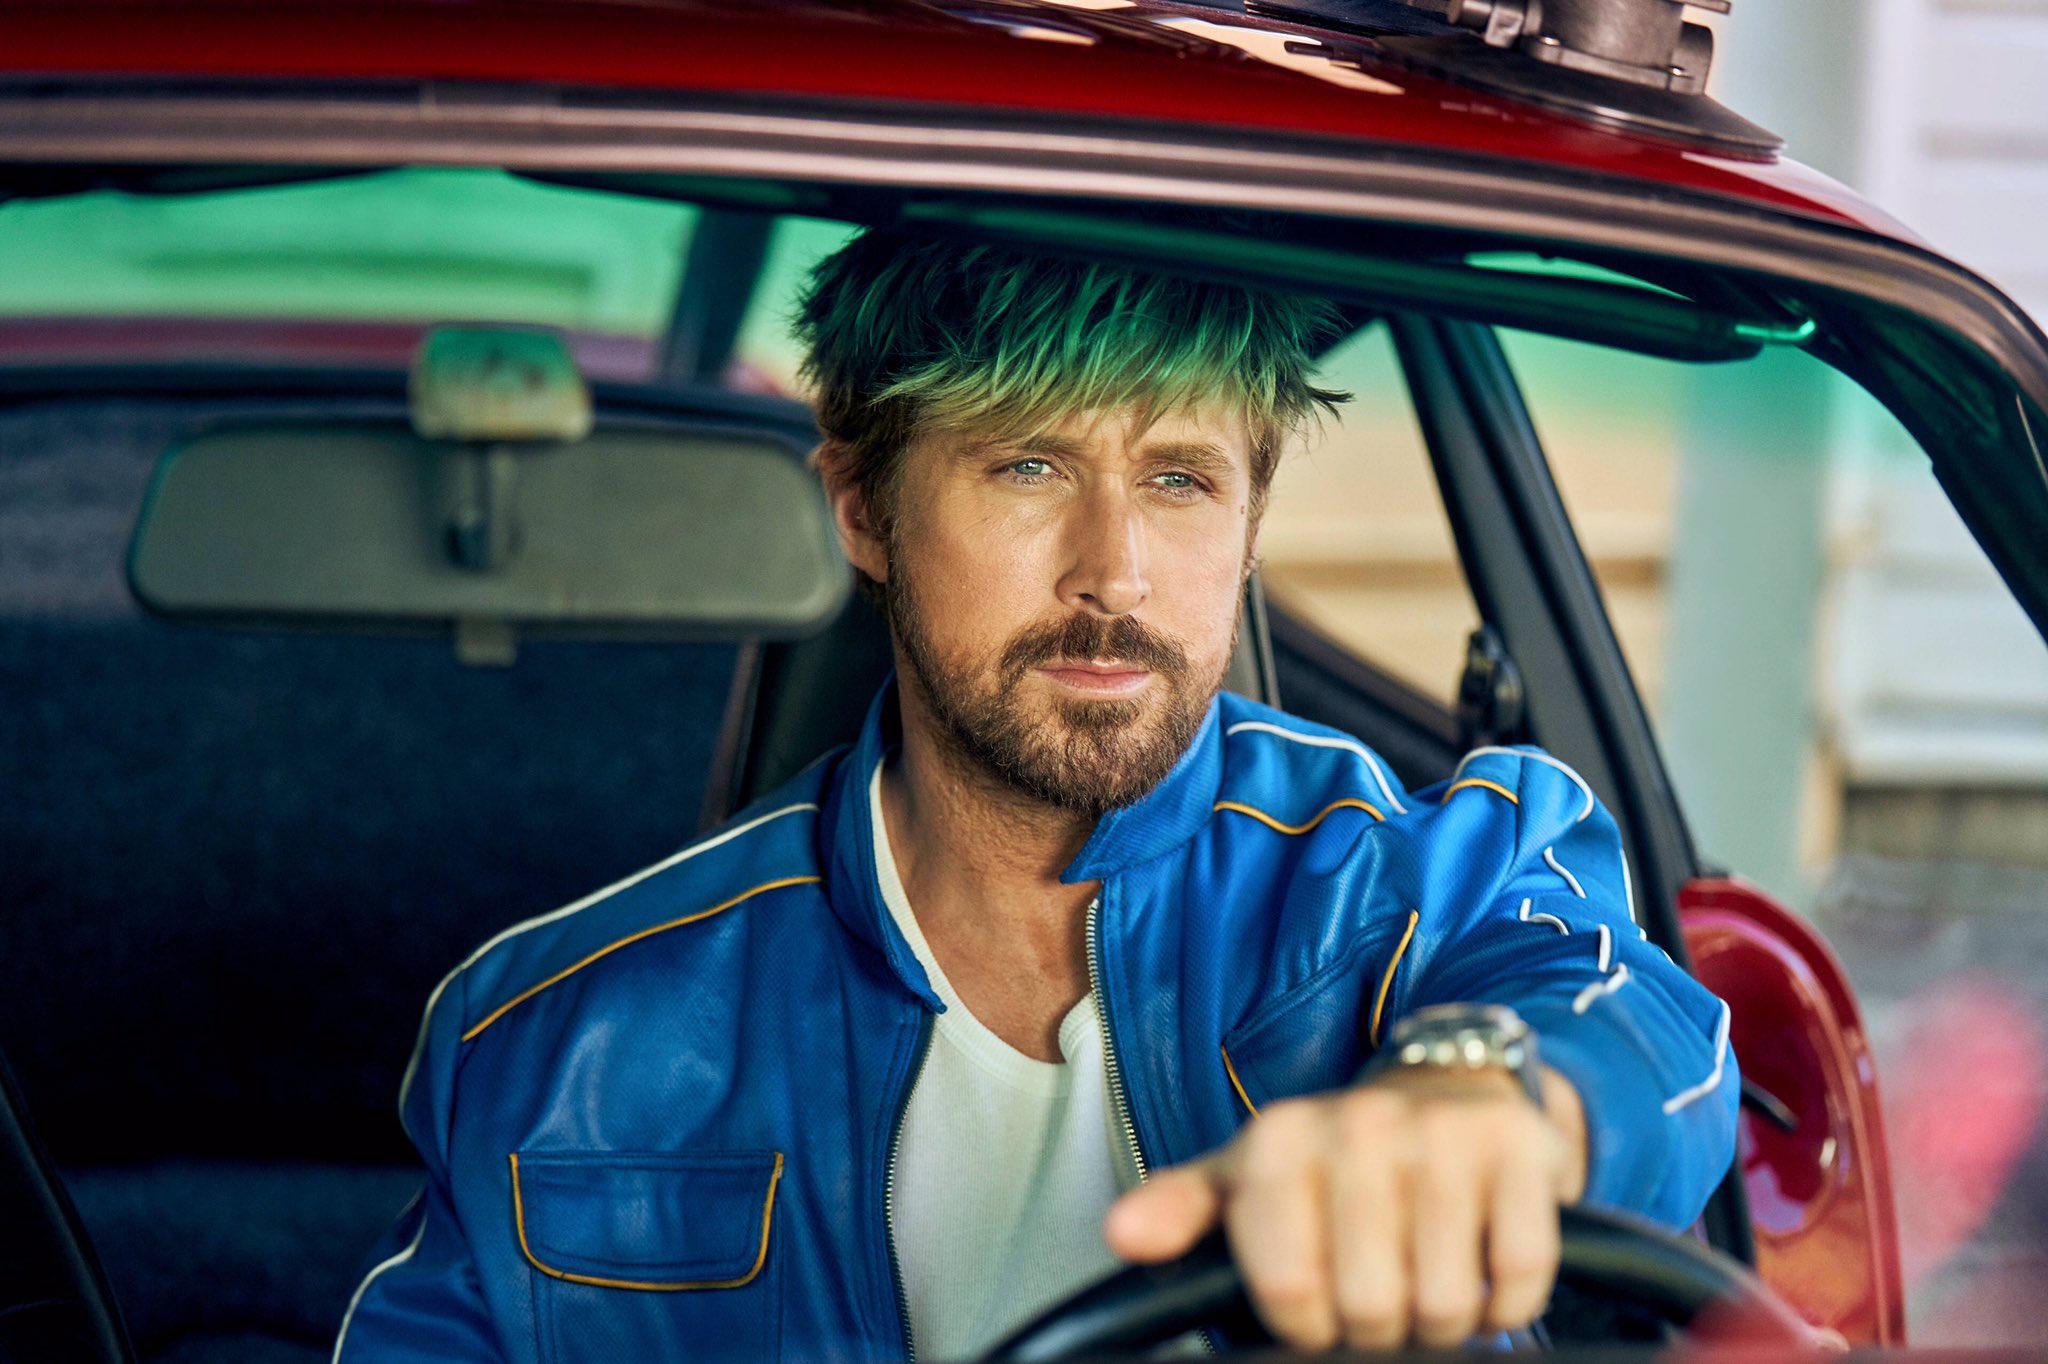 Ryan Gosling to jump an open drawbridge and roll a brand new car